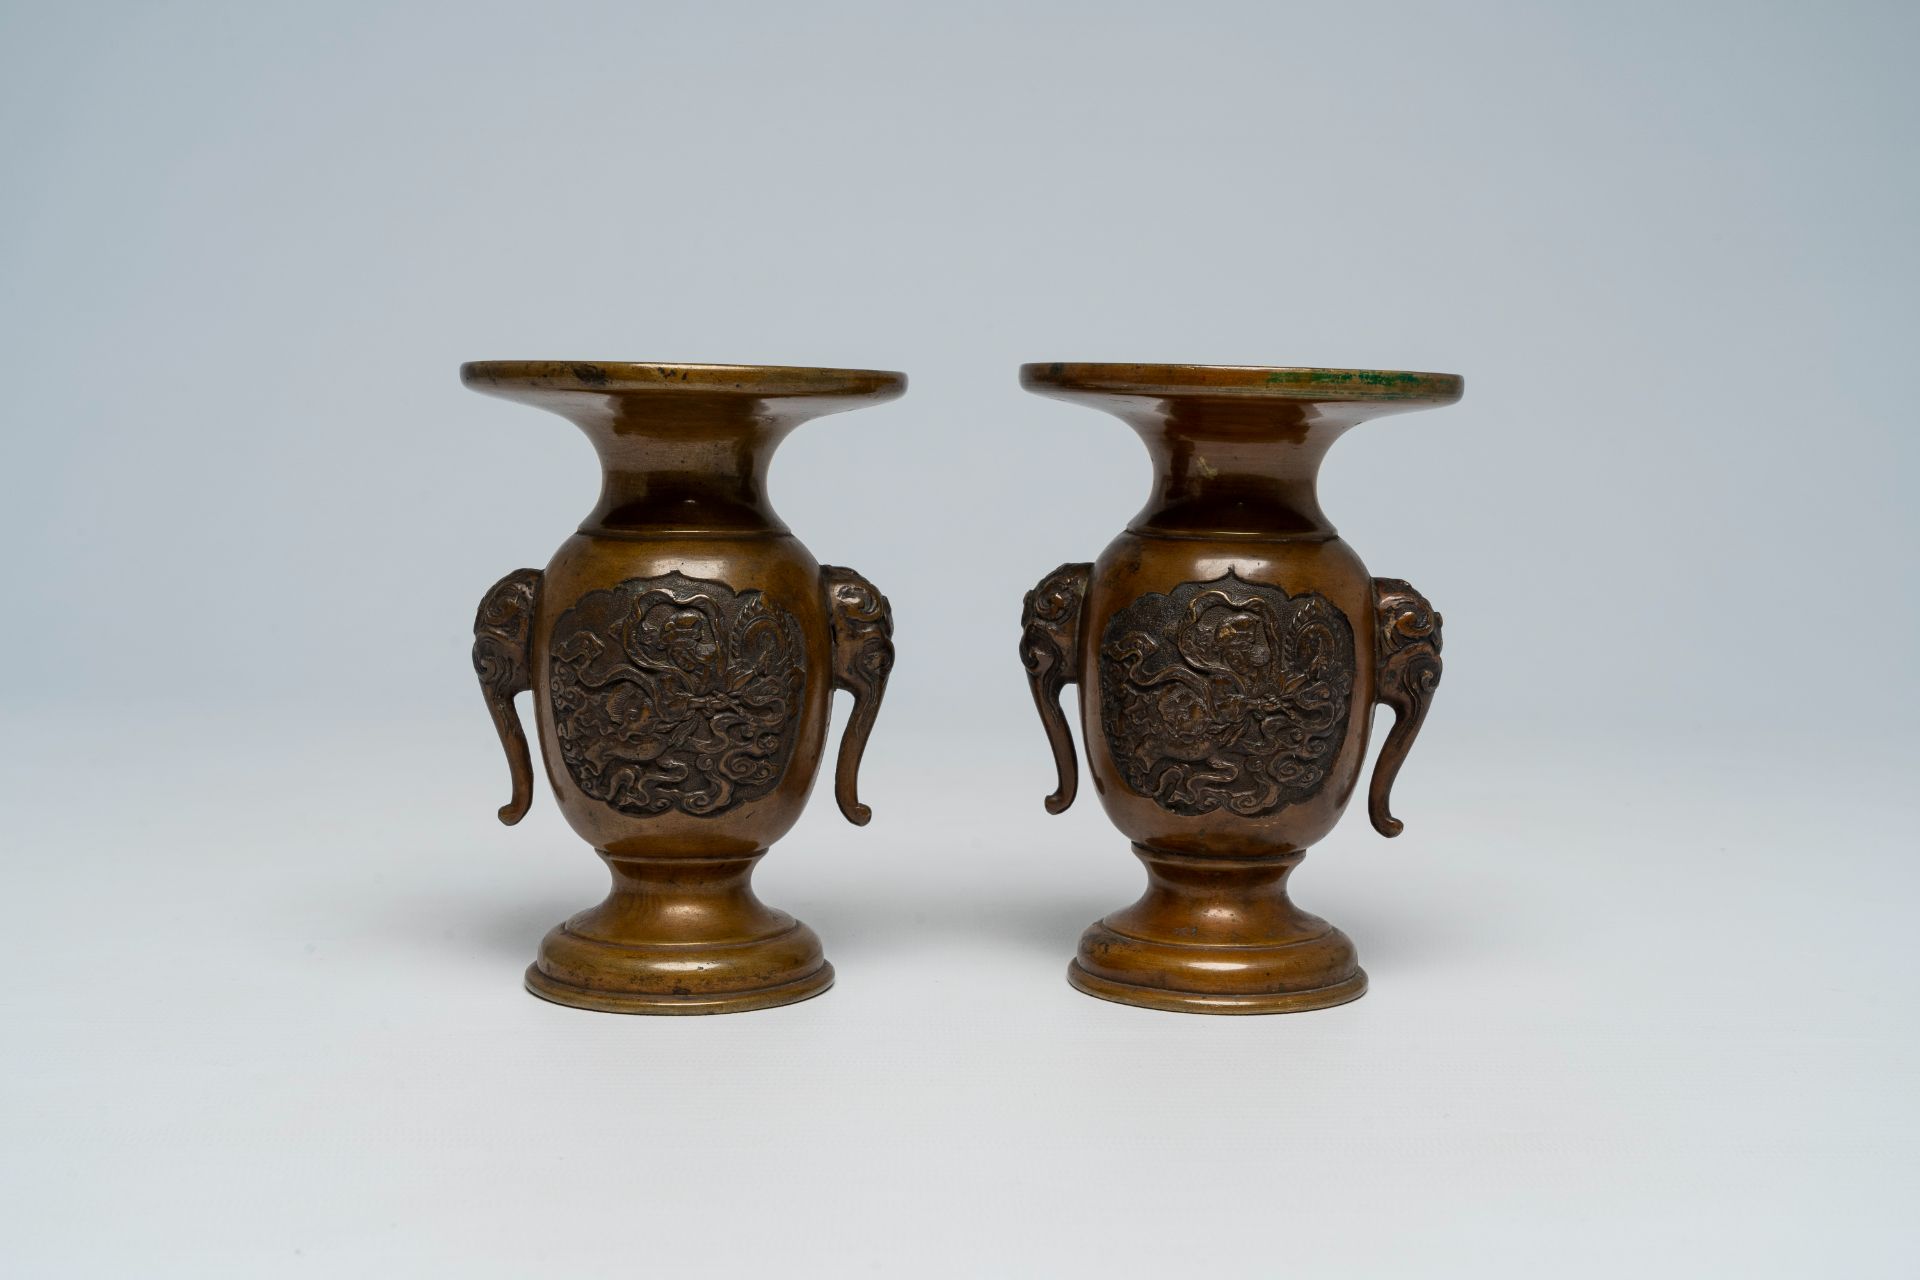 A pair of Japanese bronze vases, two mixed metal chargers with relief design, a blue and white dish - Image 18 of 21